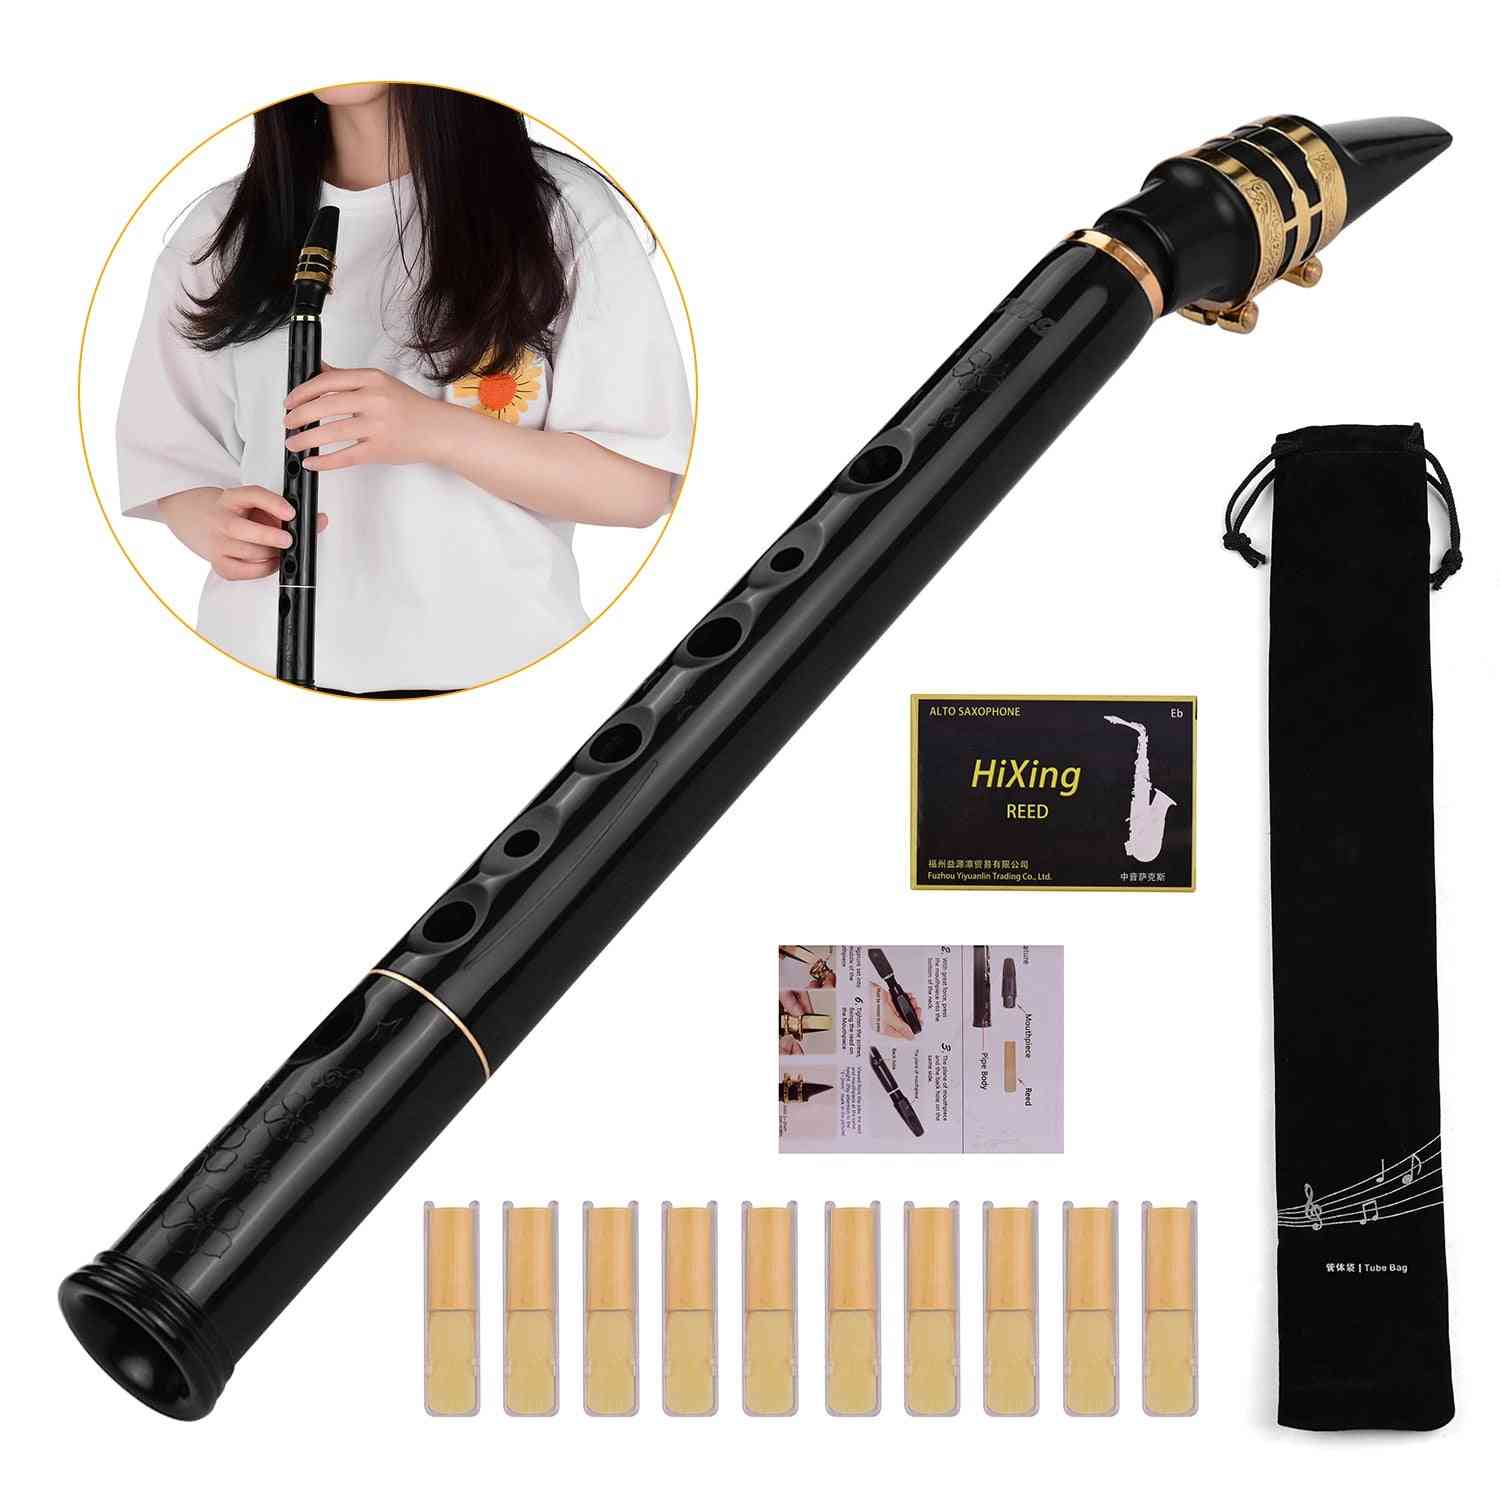 Mini Pocket Saxophone Sax, Abs Material With Mouthpieces, Carrying Bag, Woodwind Instrument